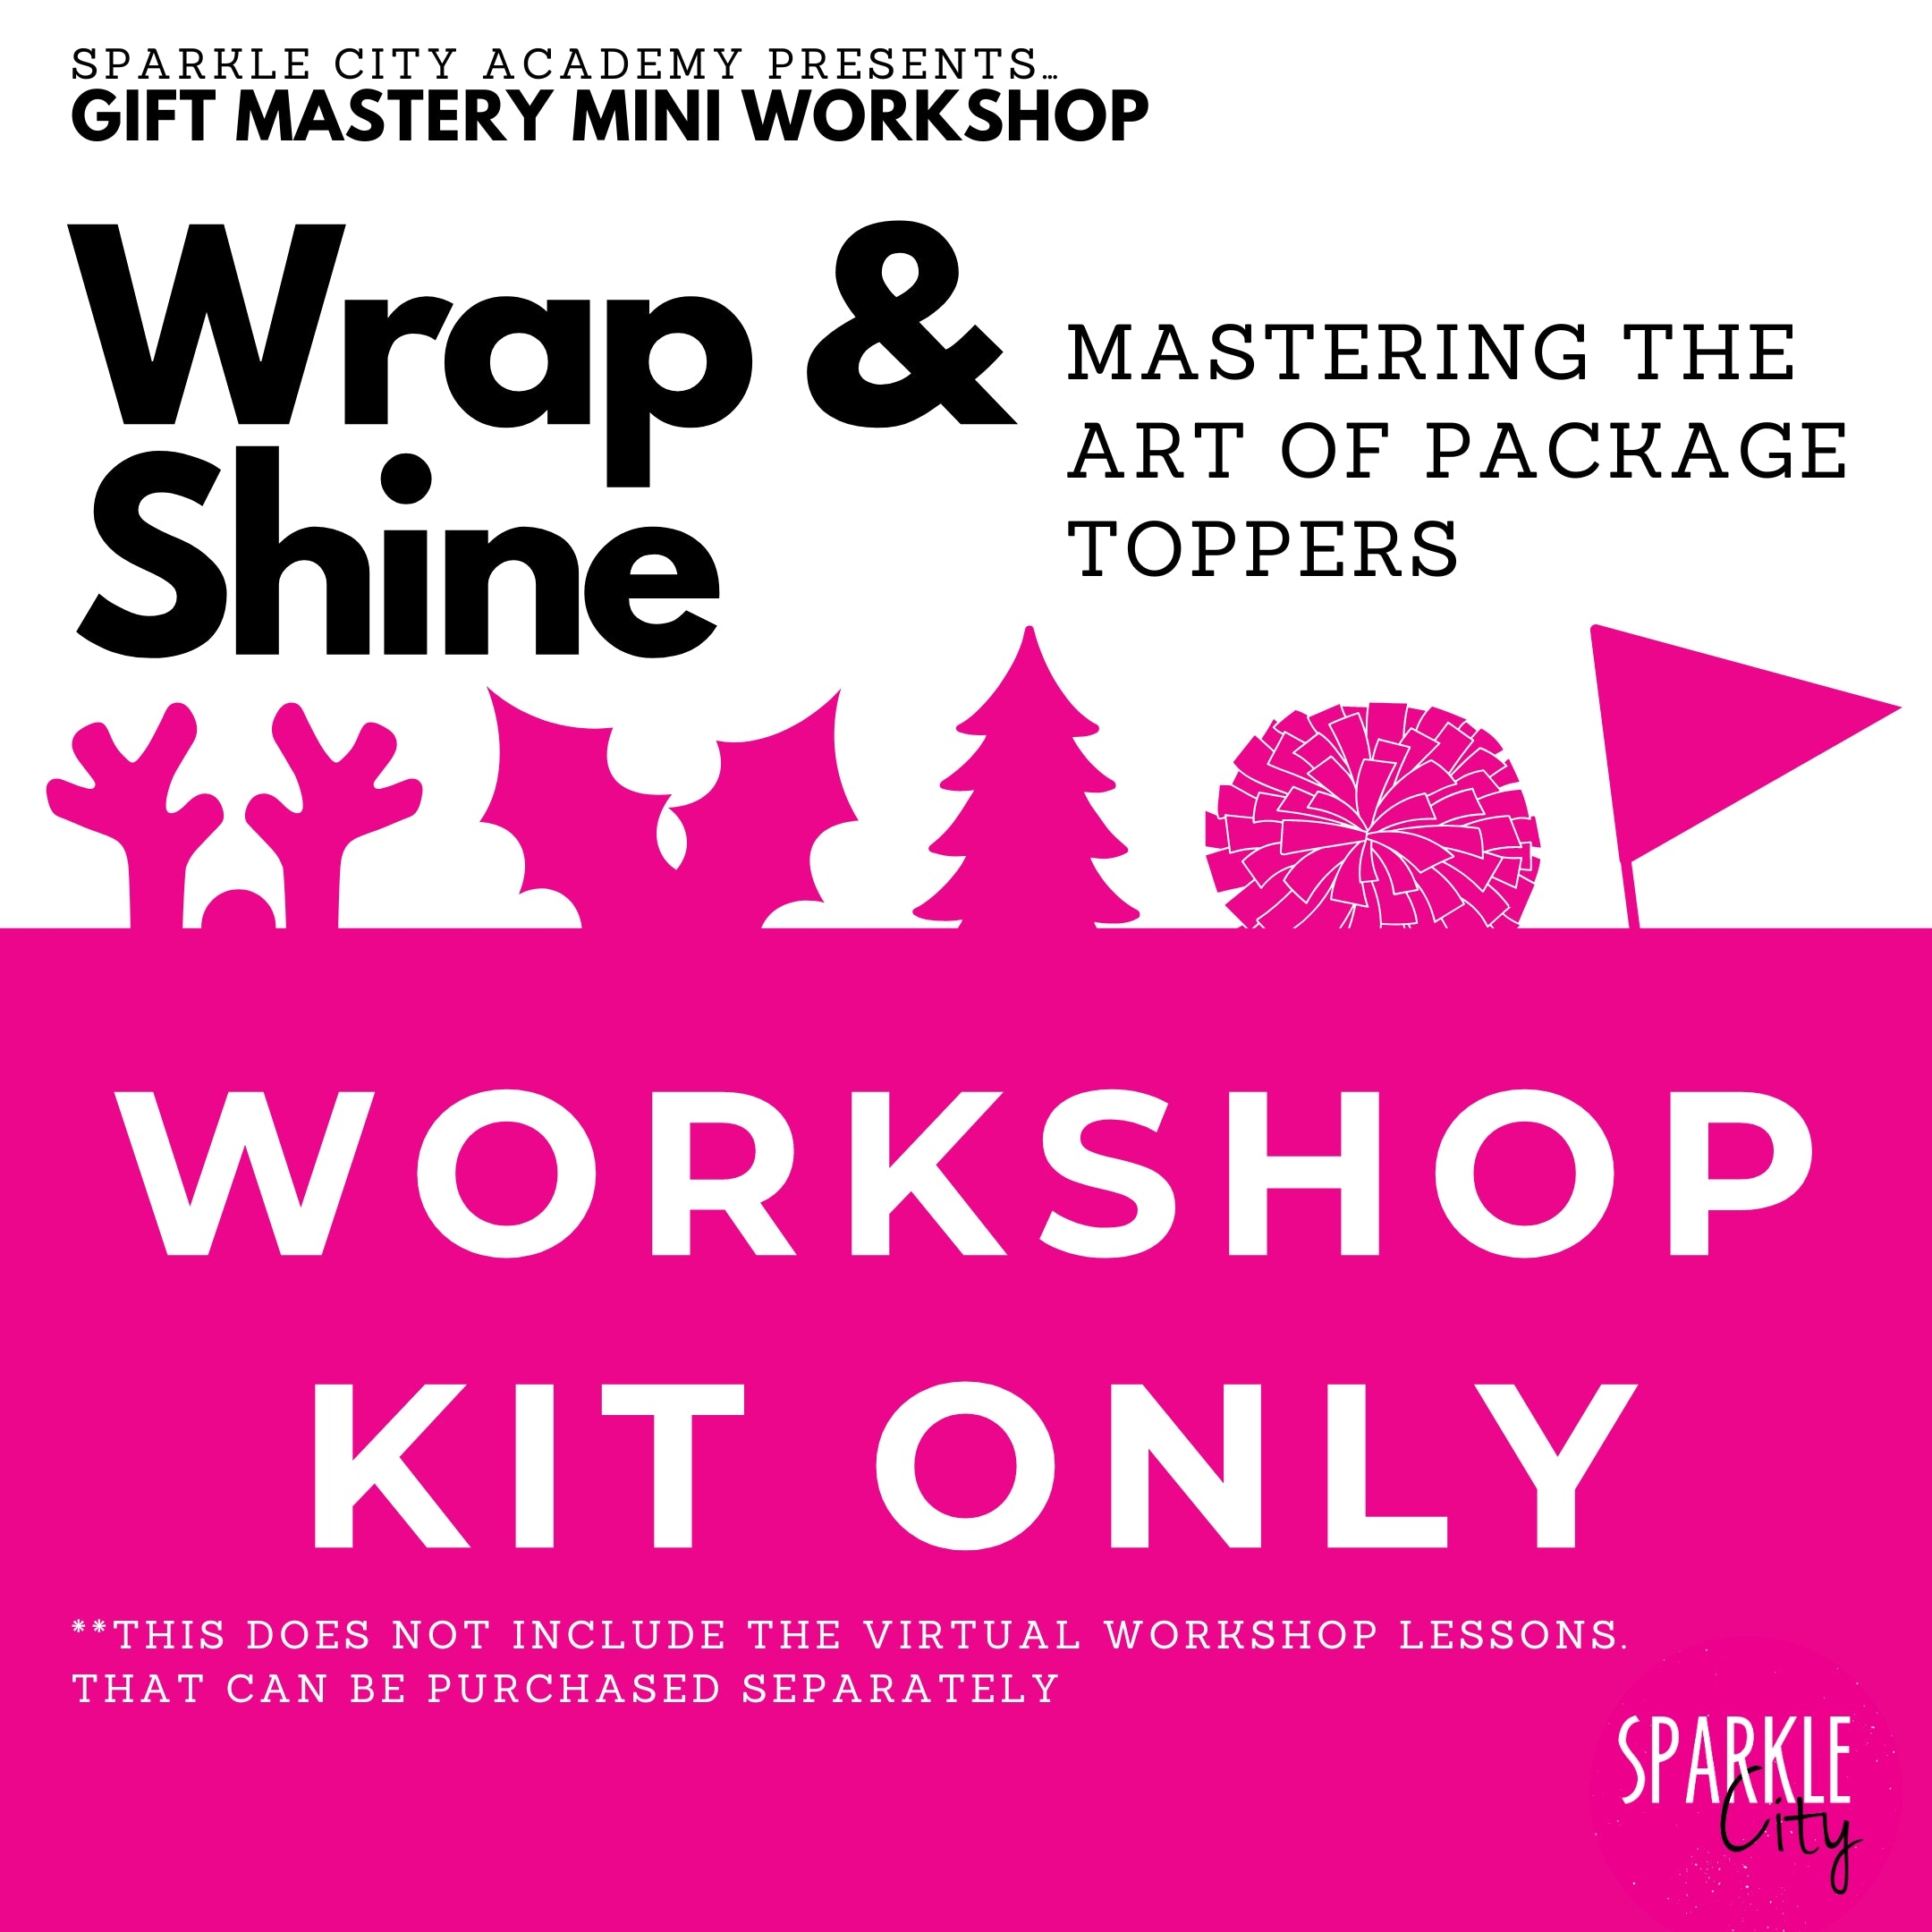 Wrap & Shine: Mastering the Art of Package Toppers - WORKSHOP KIT ONLY